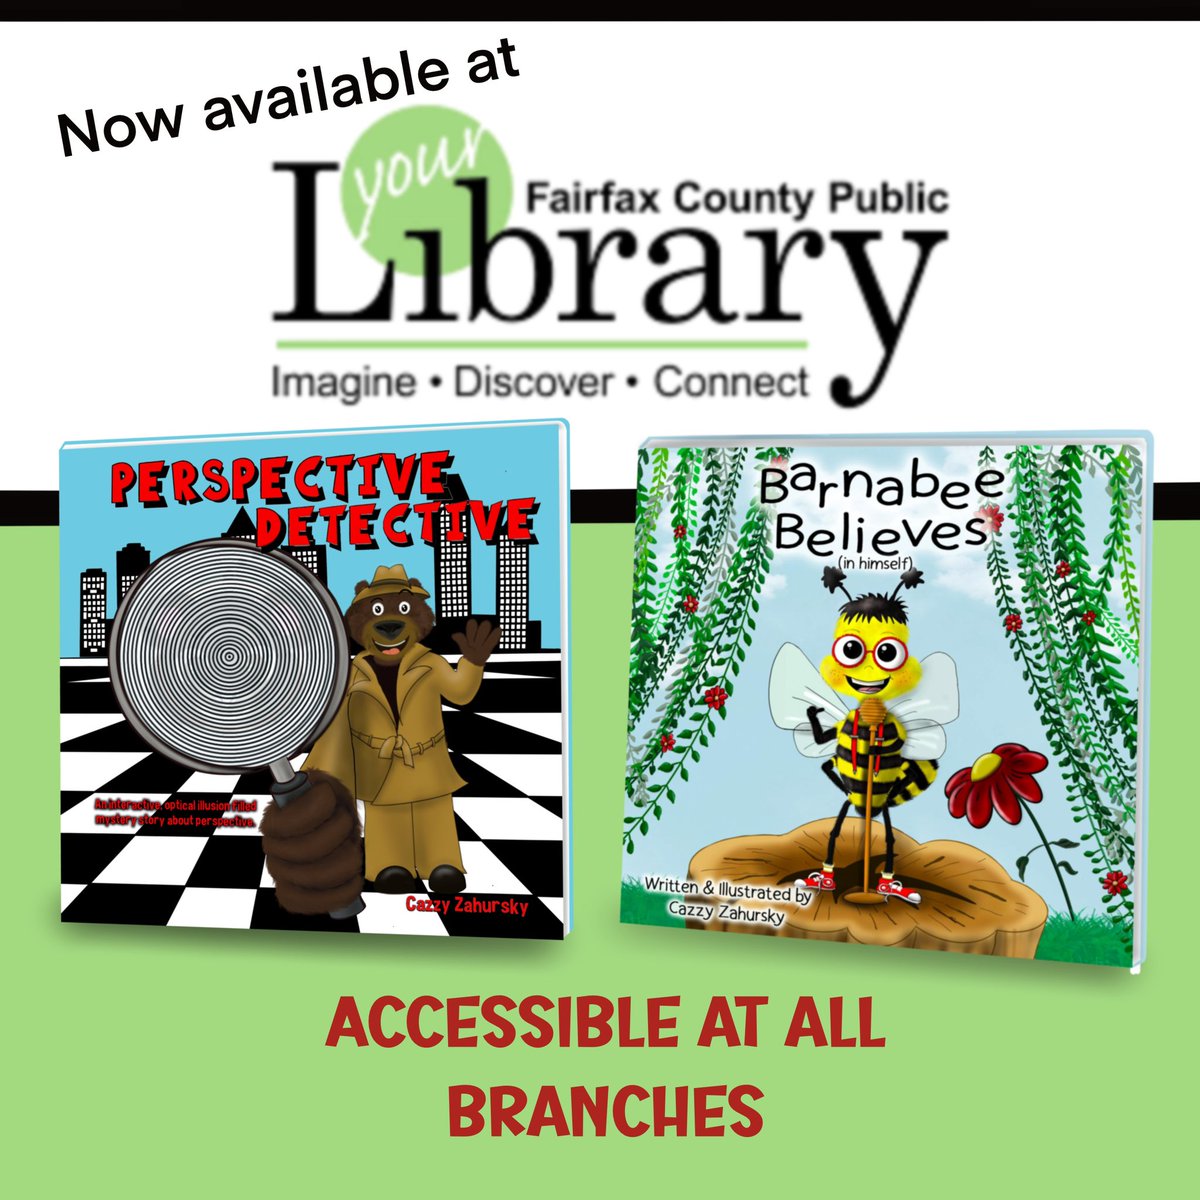 Two of my books (Perspective Detective and Barnabee Believes in Himself) are now available at all Fairfax County Public Library branches. Thank you so much FCPL for all your incredible support. I am grateful and humbled.

#grateful  #librariesrock #ilovethelibrary  #localauthors